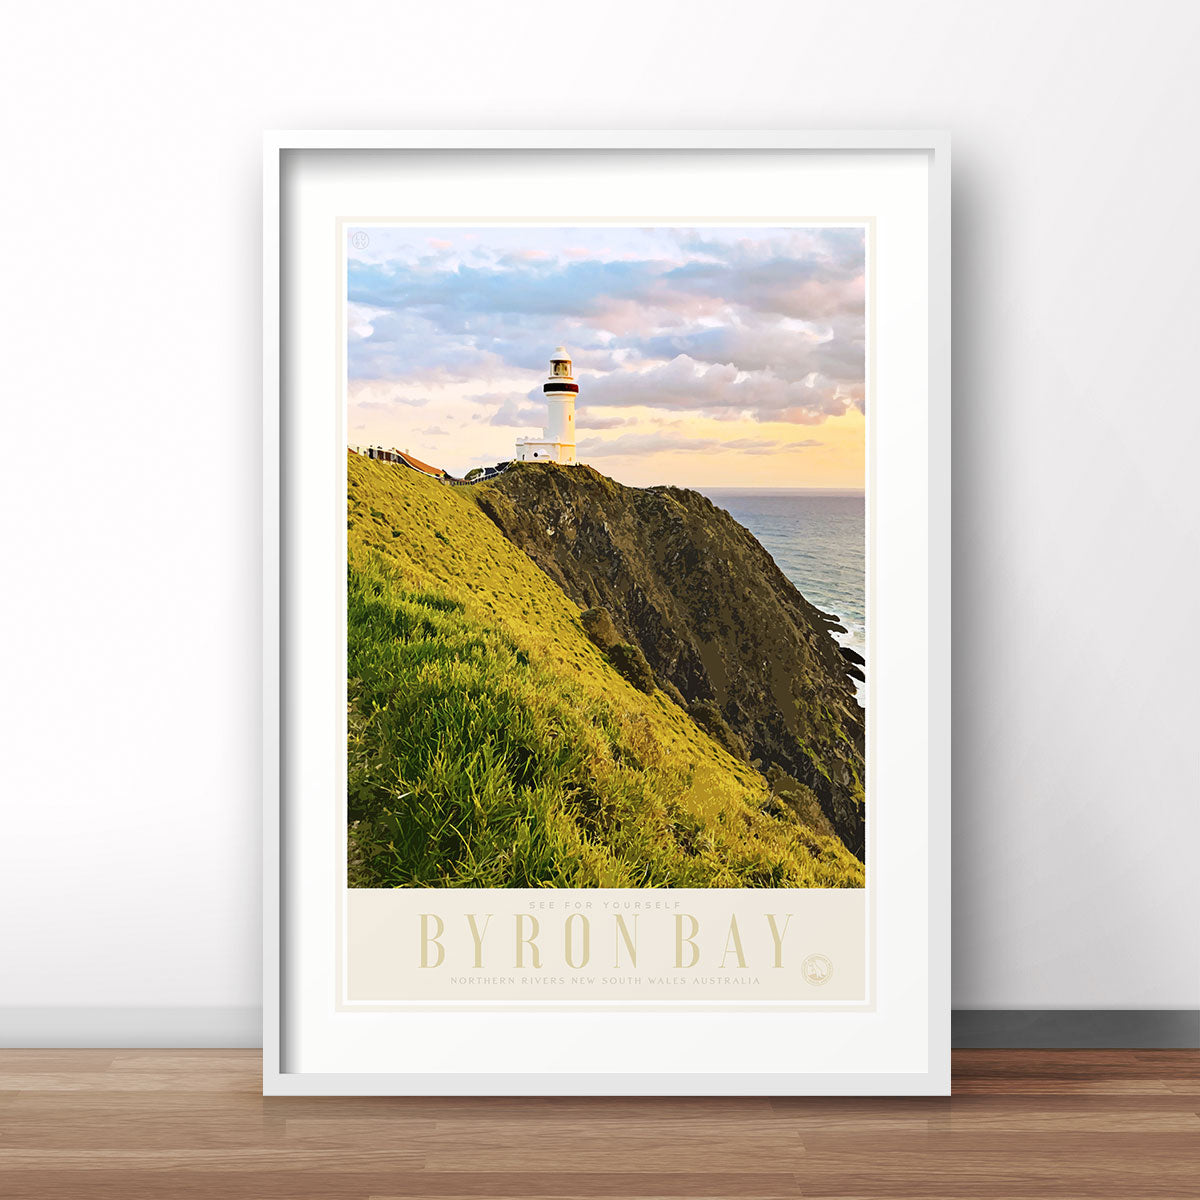 Byron Bay retro vintage travel prints posters by places we luv